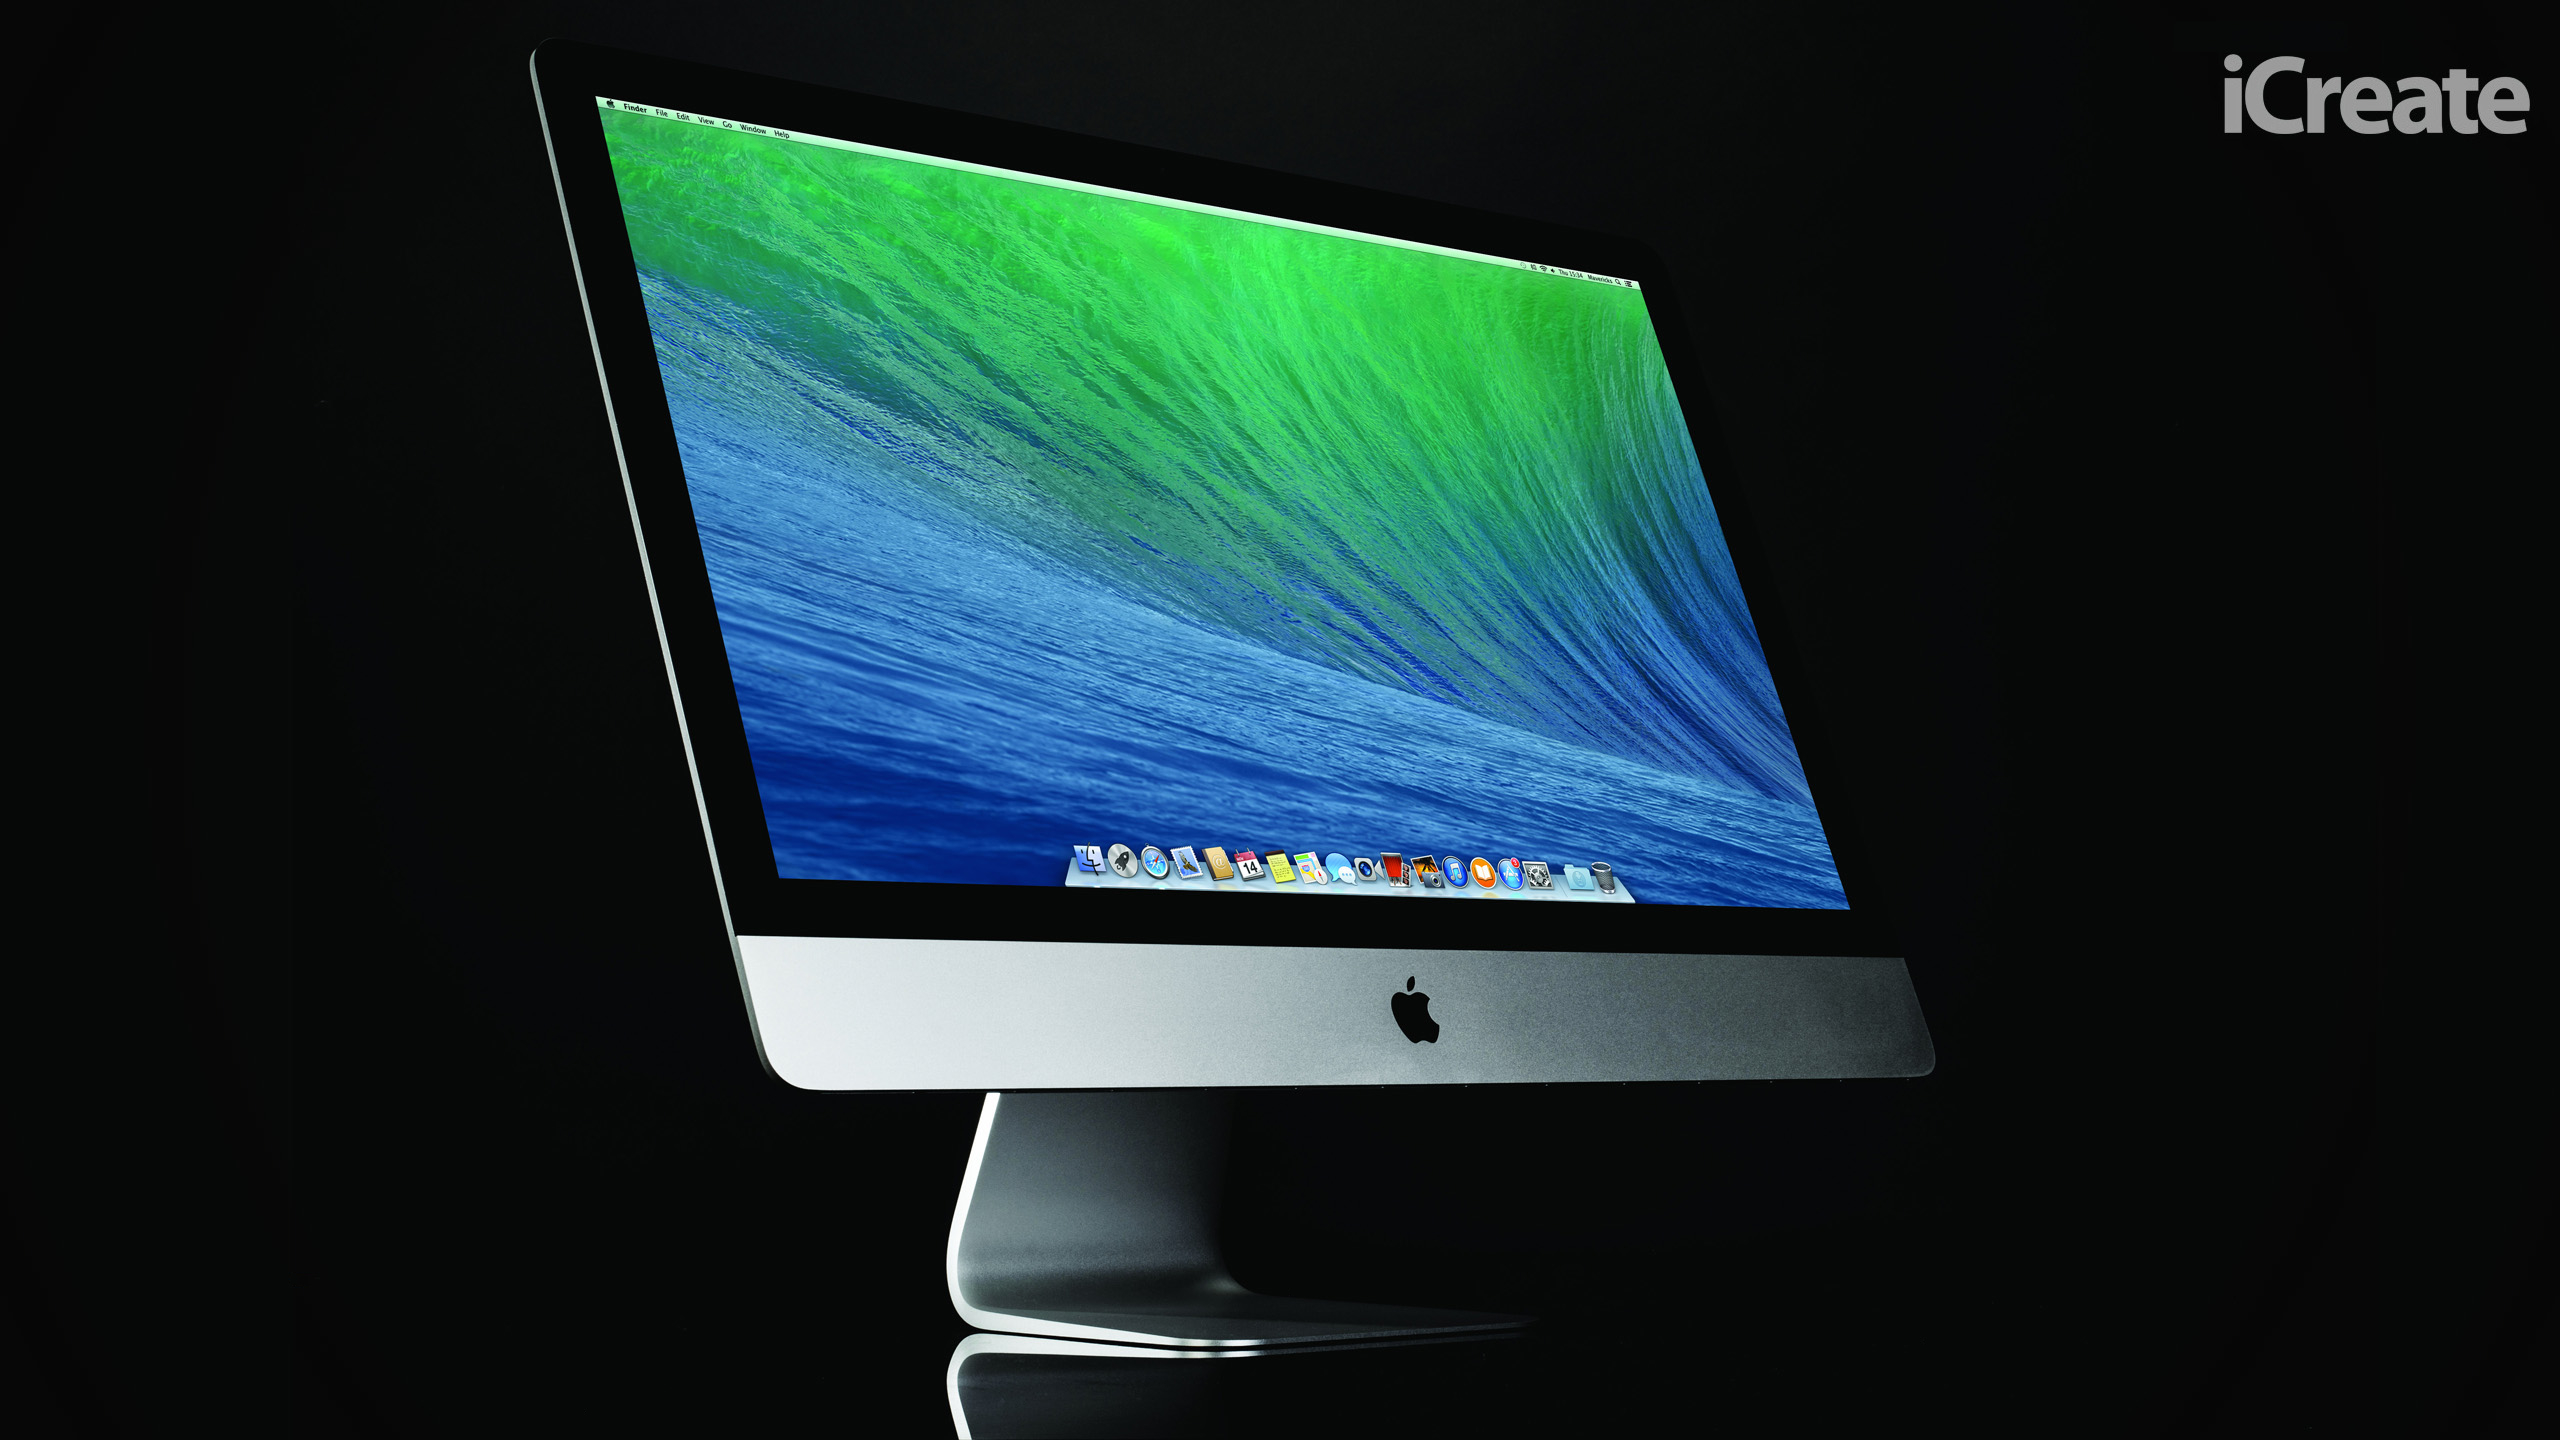 Wallpaper Wednesday The Thinnest Imac Ever Icreate